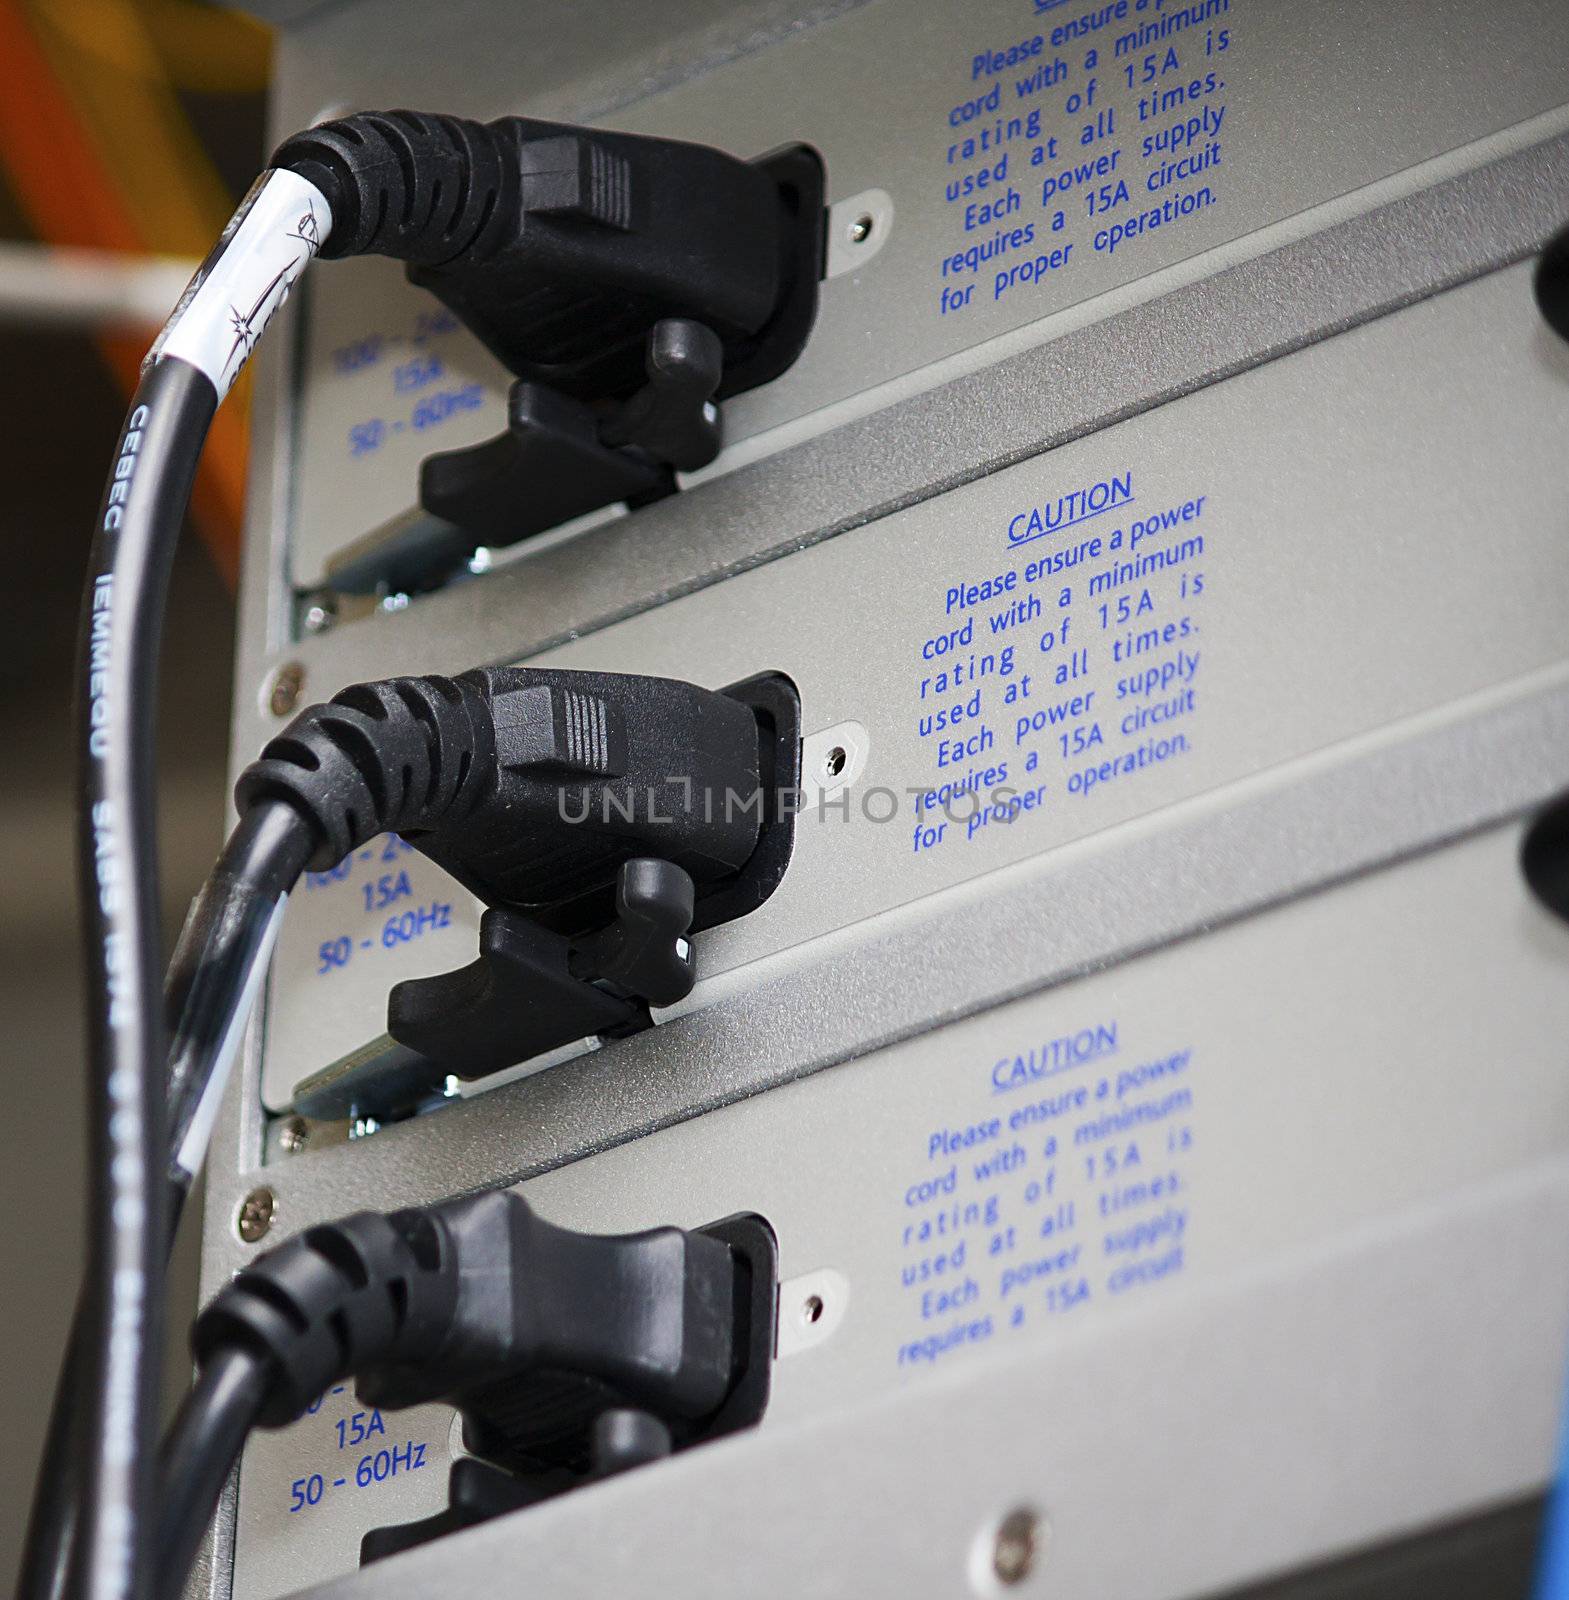 Power connectors connected to equipment